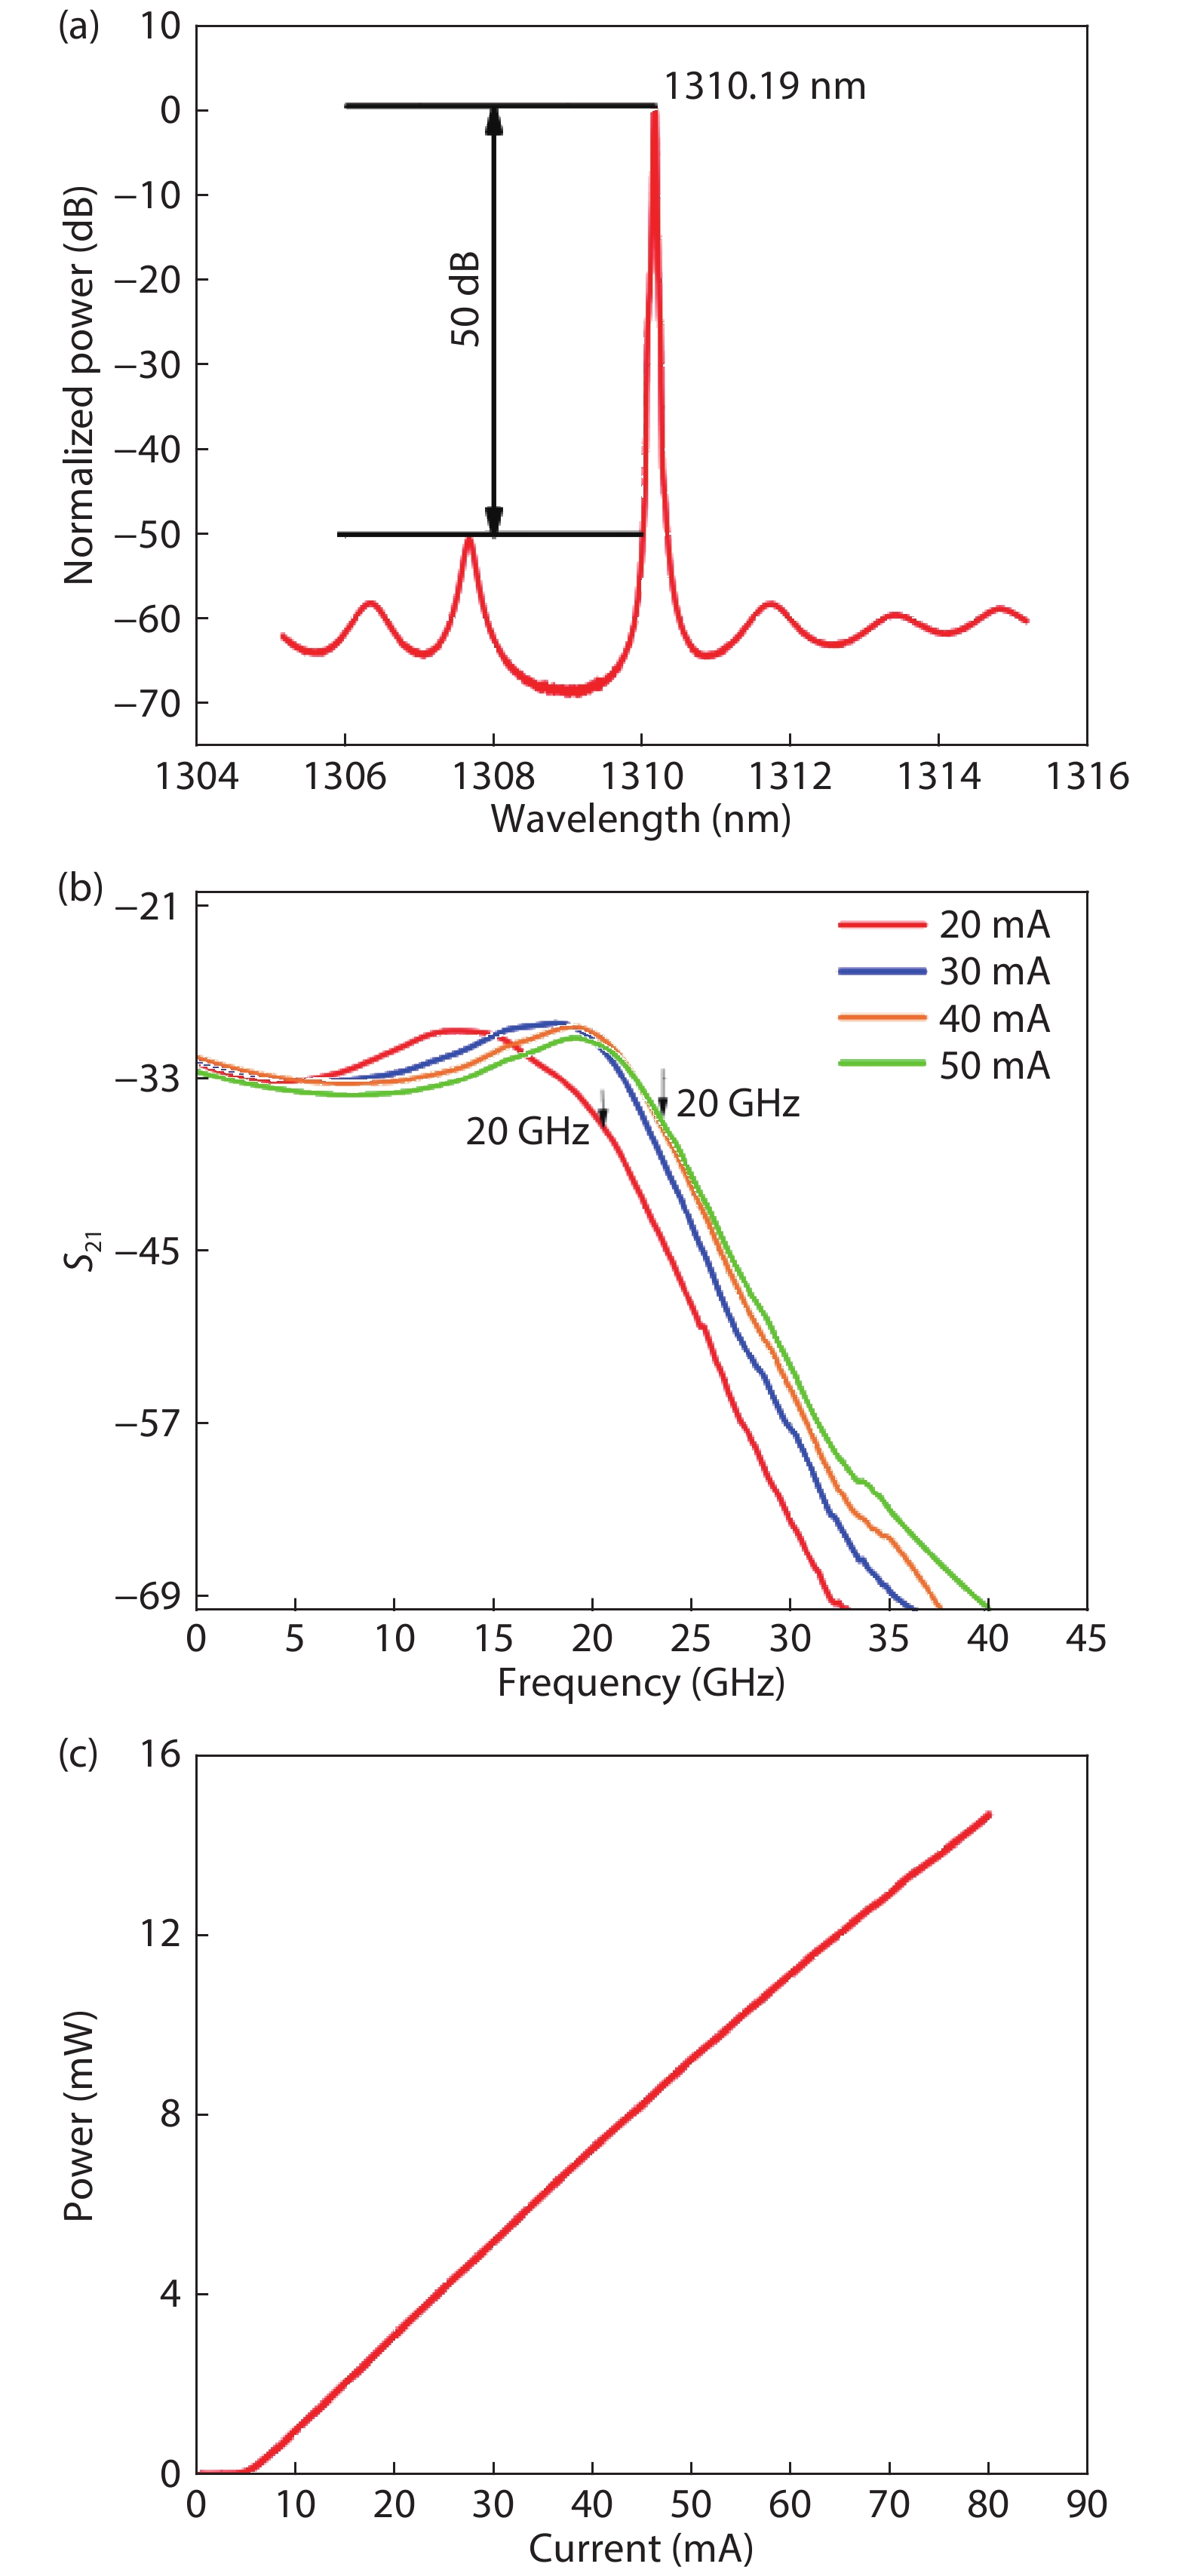 (Color online) (a) Measured optical spectrum of DML. (b) Frequency response of DML. (c) Measured P–I curve of DML.